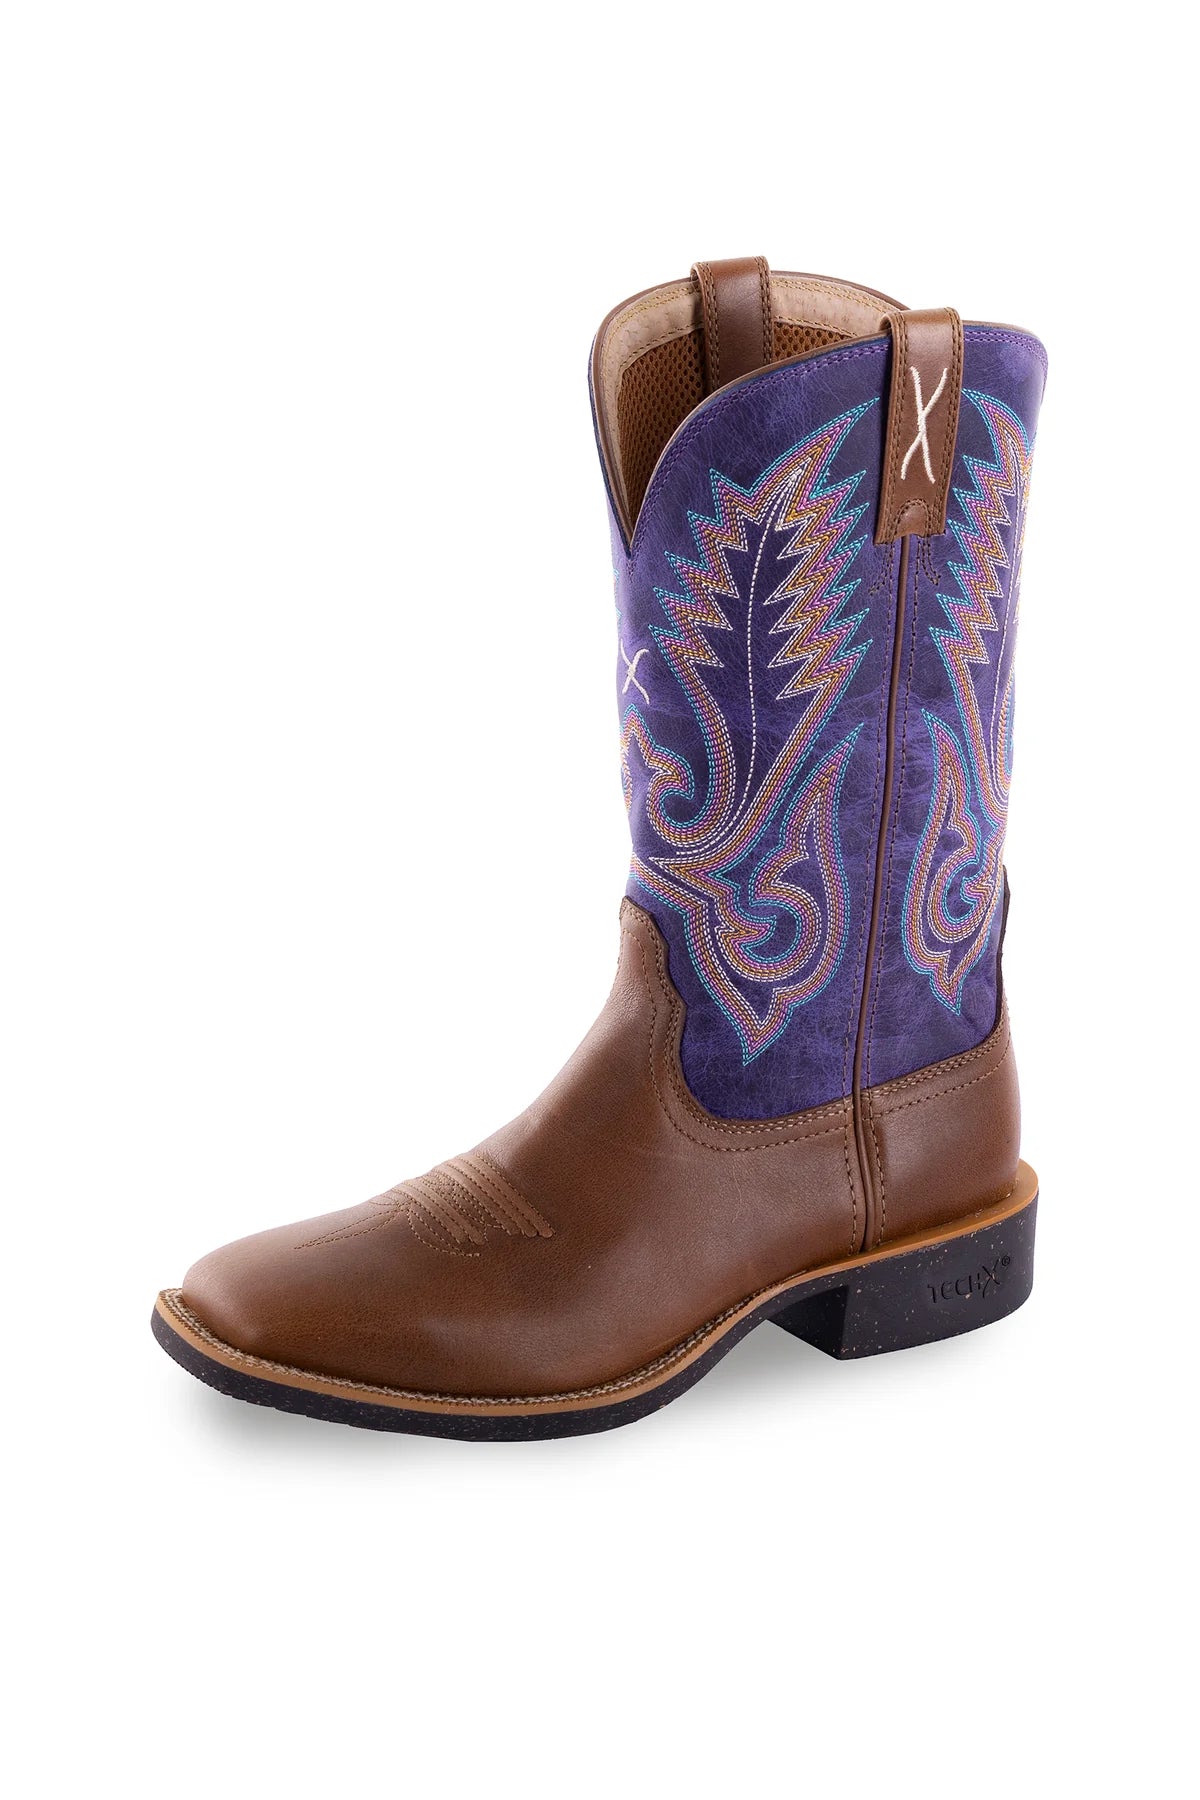 Twisted X Ladies 11” Tech X2 Boot - Ginger/Vintage Violet